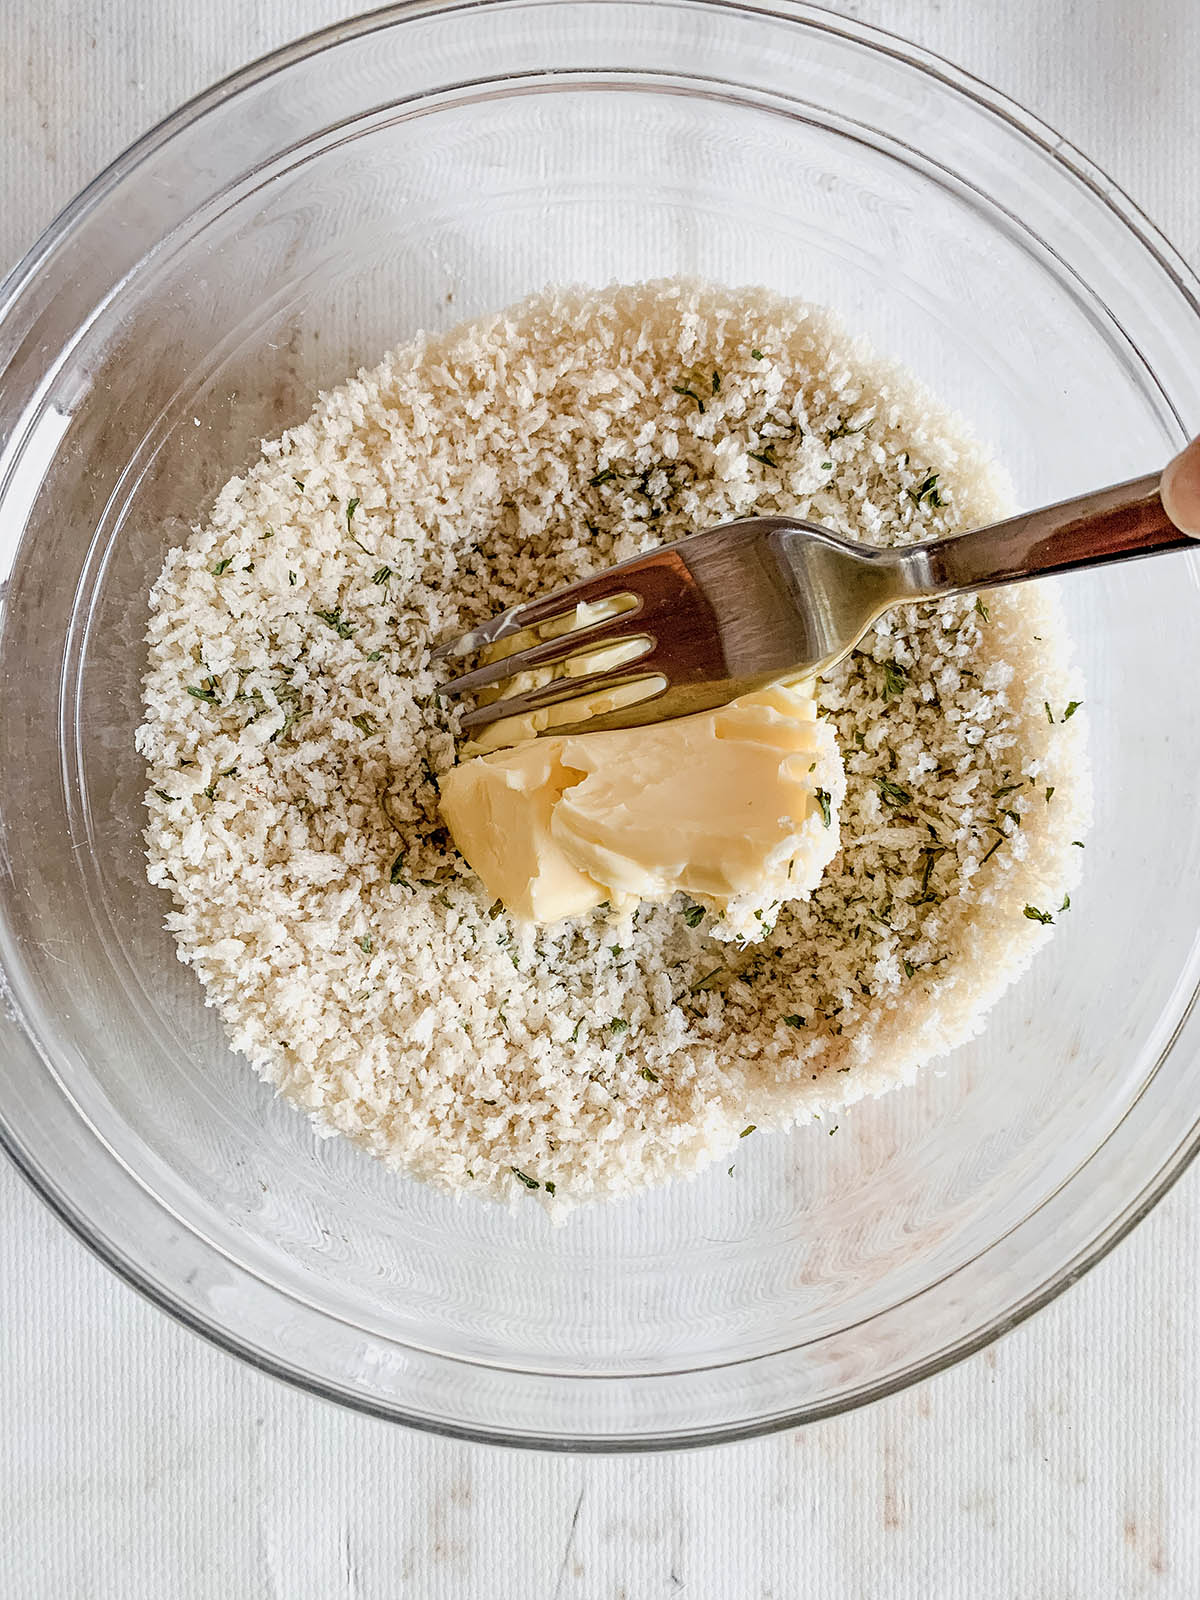 Panko breadcrumbs and spices mixed in a bowl with a chunk of butter on top and a fork about to mix the butter in.